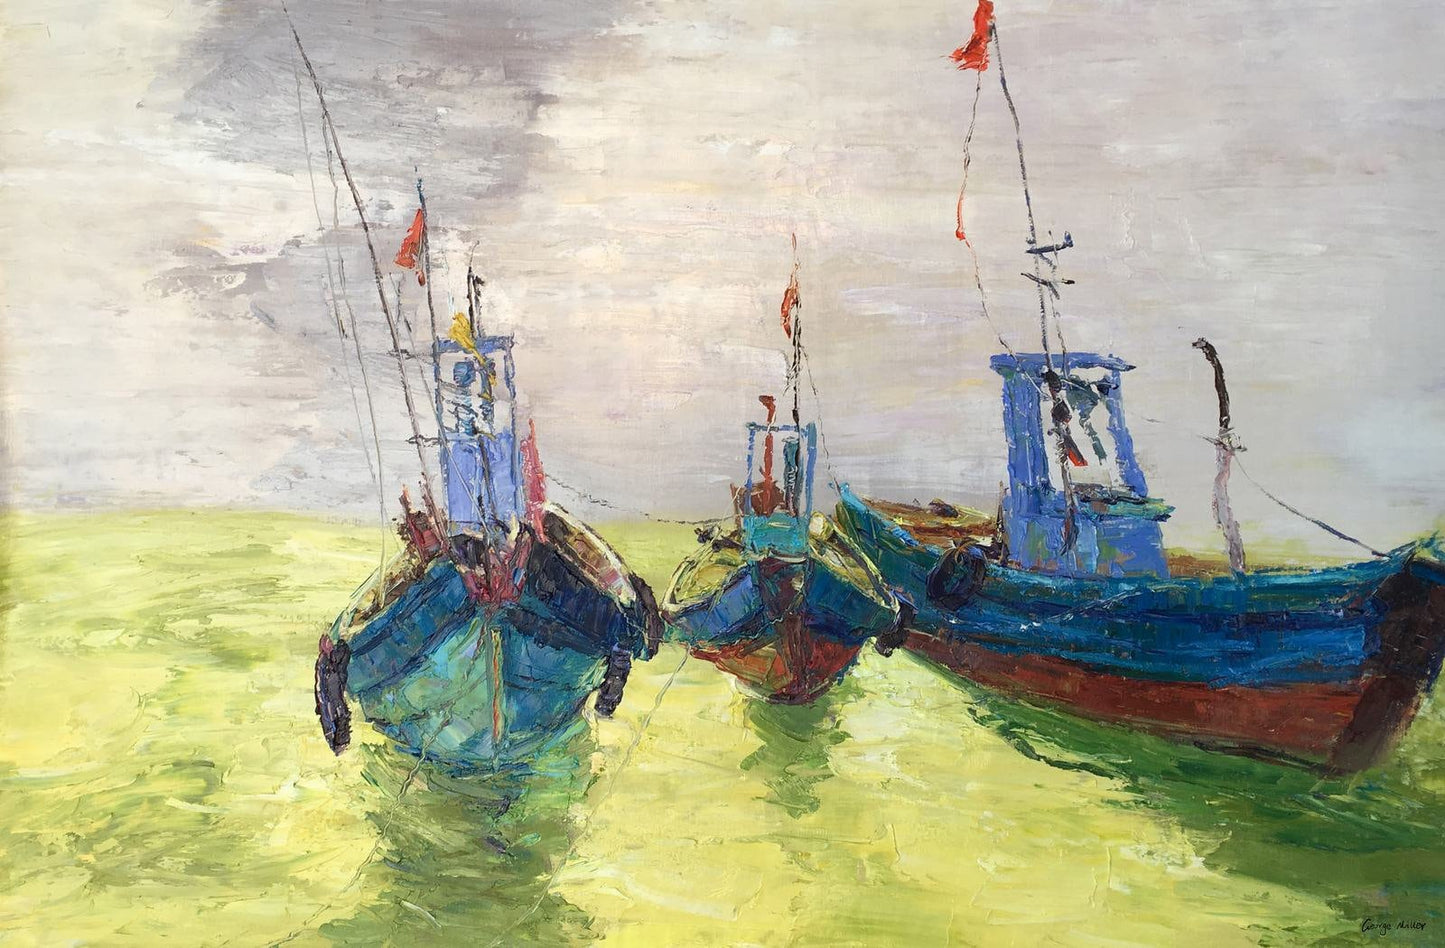 Original Oil Painting Fishing Boats Seascape, Oil On Canvas, Large Oil Painting Original Canvas, Rustic Oil Painting, Impasto Oil Painting